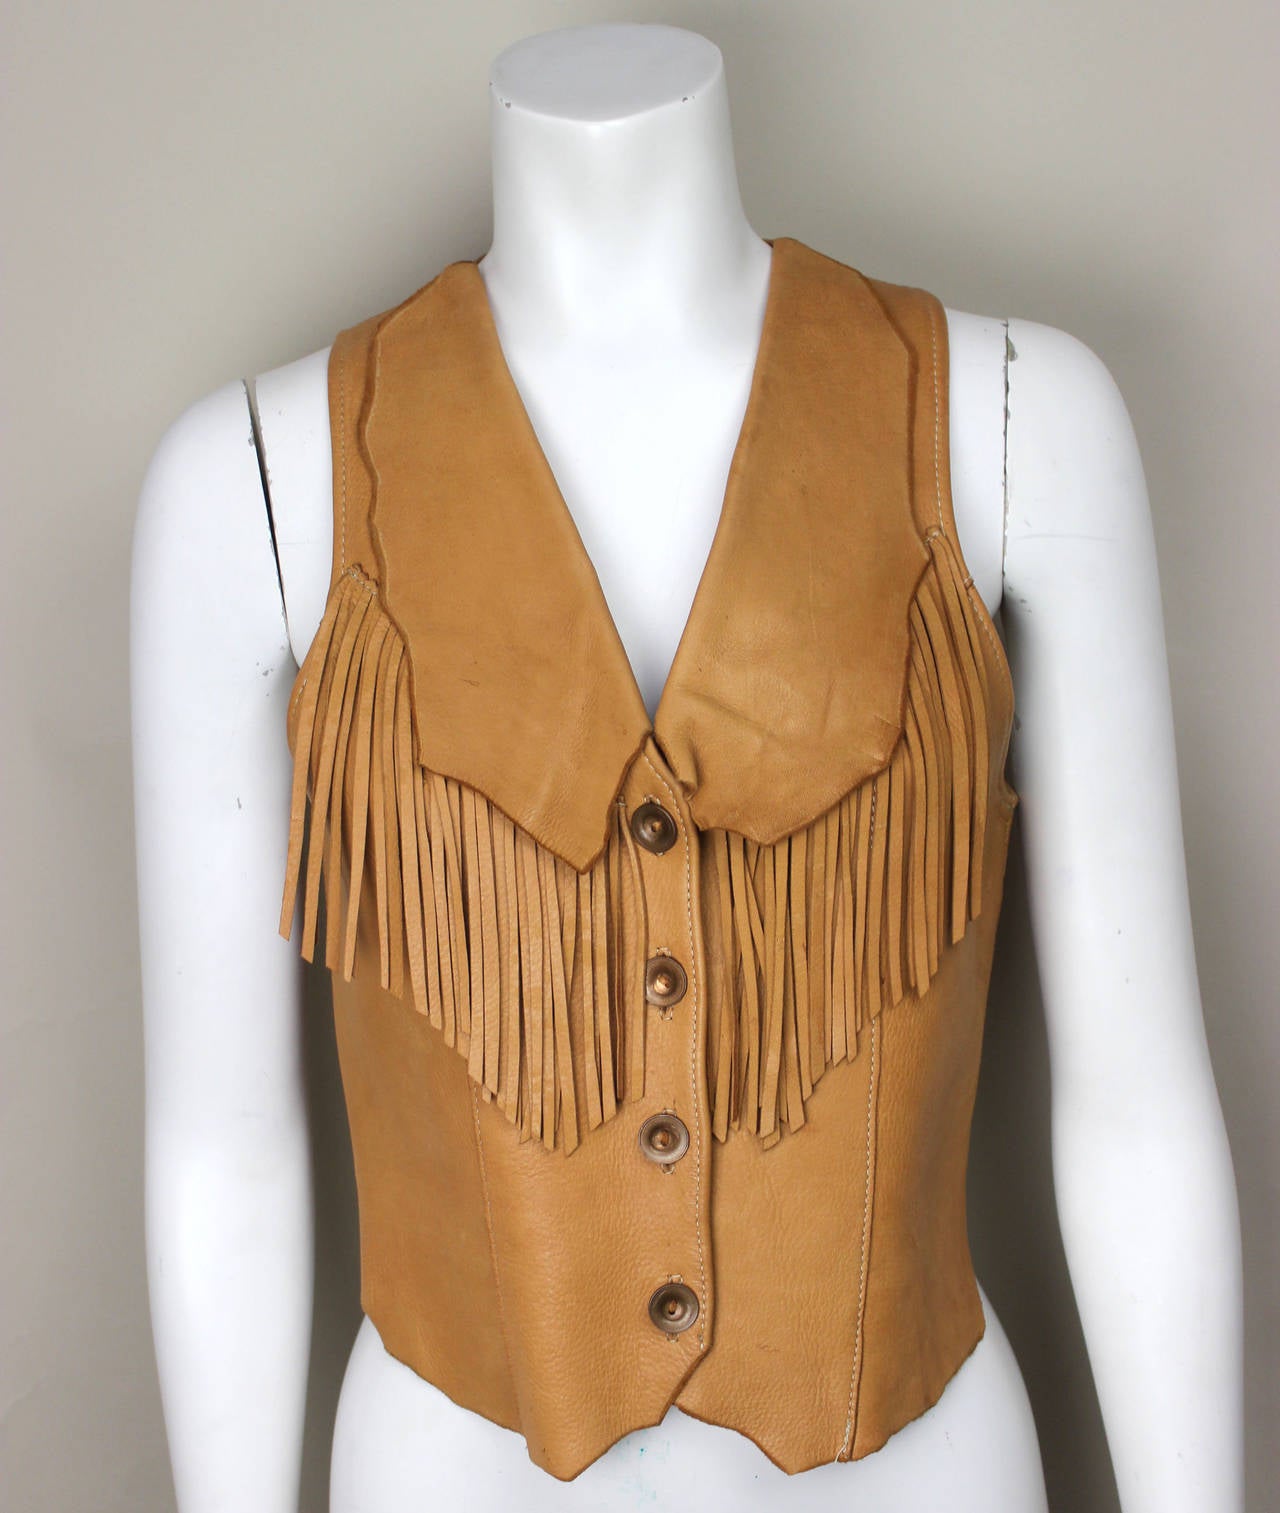 This high quality vest was custom made in a supple leather. Its western inspired  features include beautiful fringe adorning the front and back. With fringed garments being the height of style this season, this fitted
vest is as relevant today as